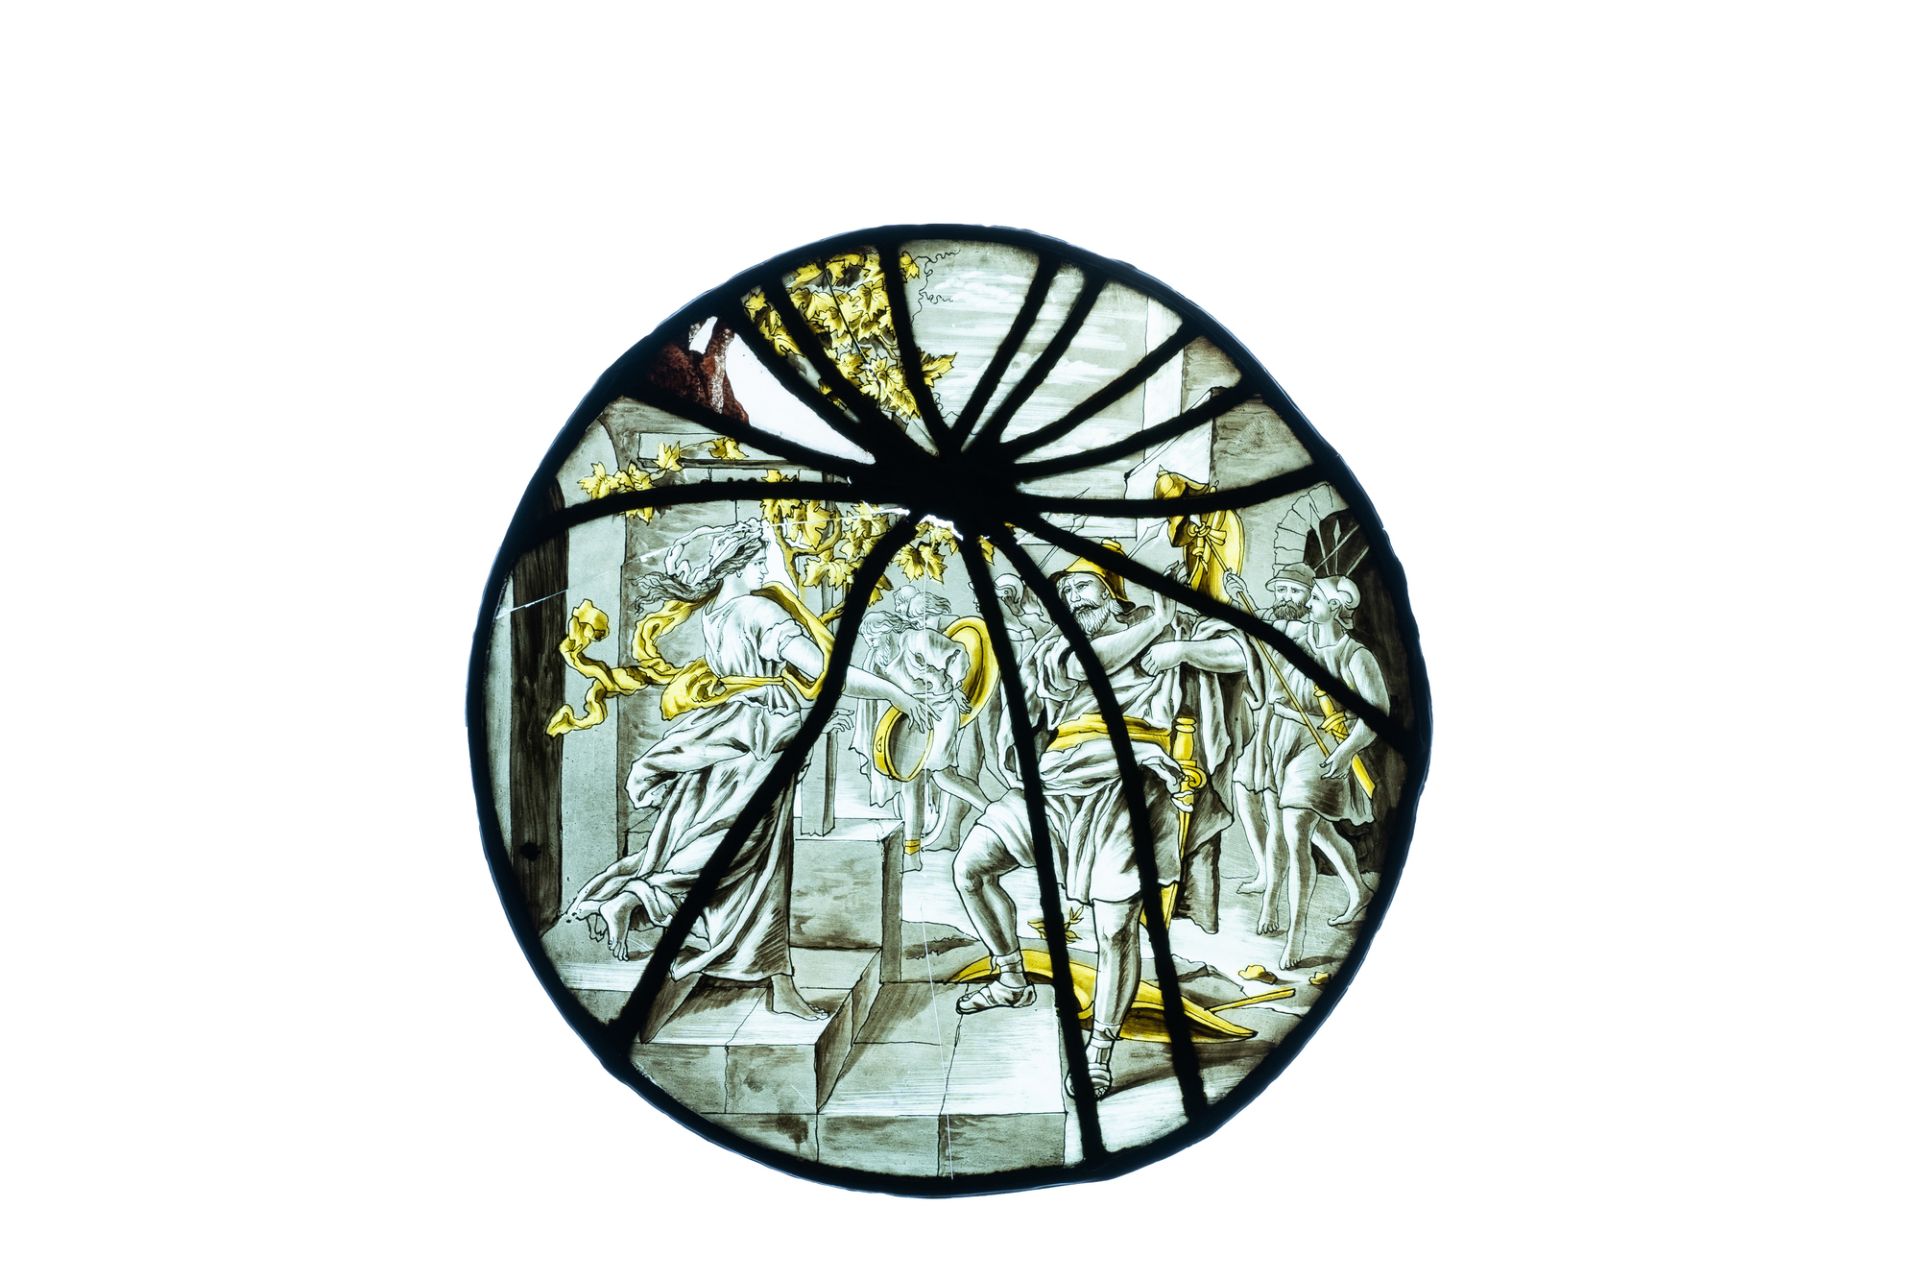 A pair of grisaille and silver yellow painted glass roundels with biblical scenes, France, 17th C. - Image 5 of 5